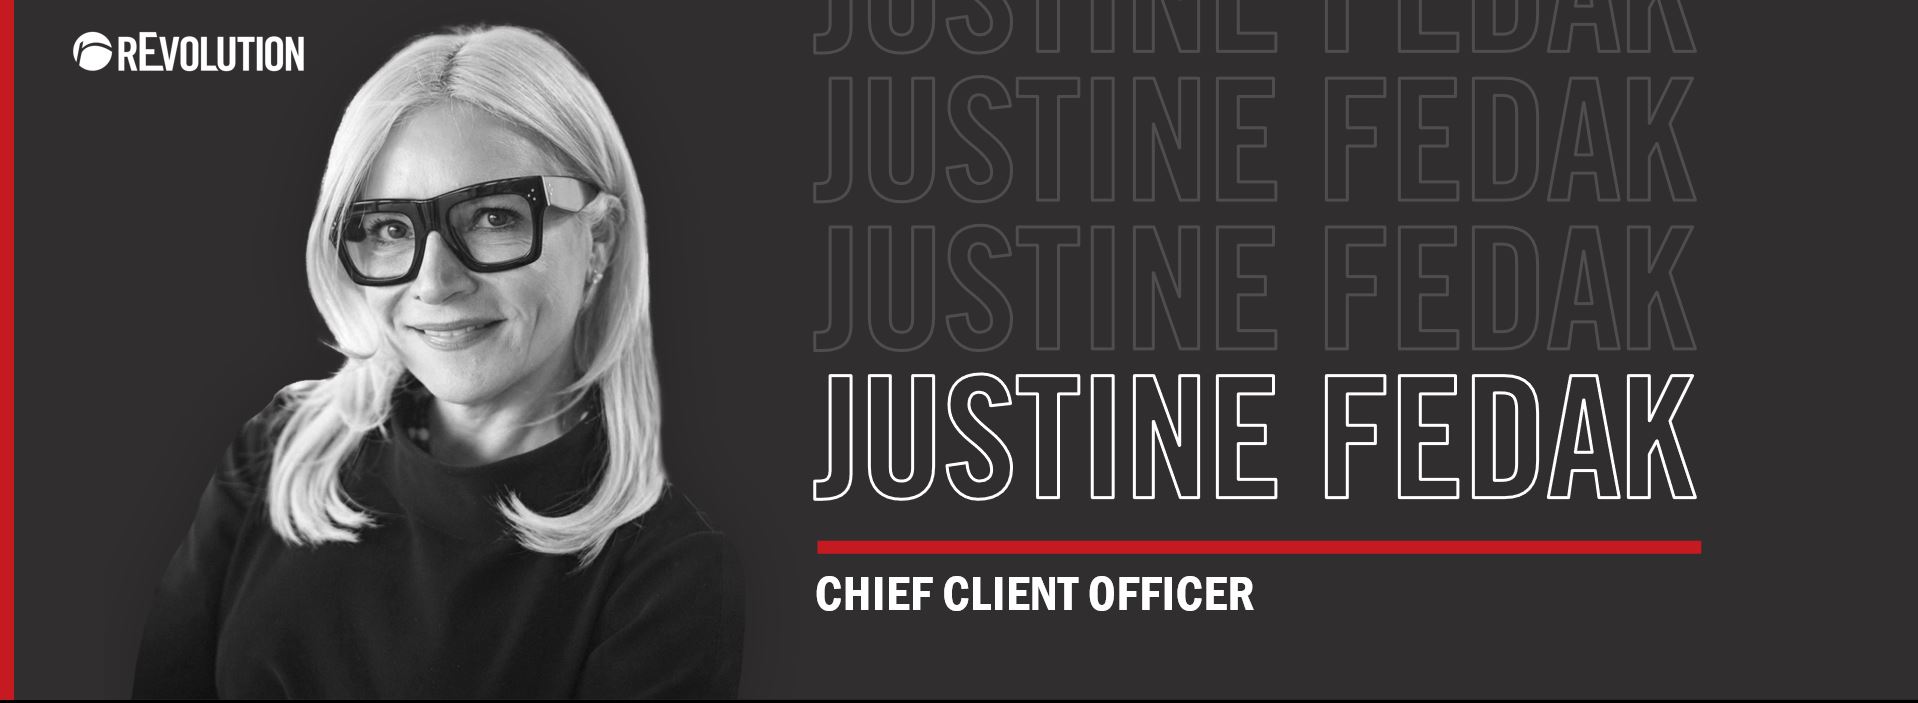 rEvolution Names Justine Fedak as Chief Client Officer